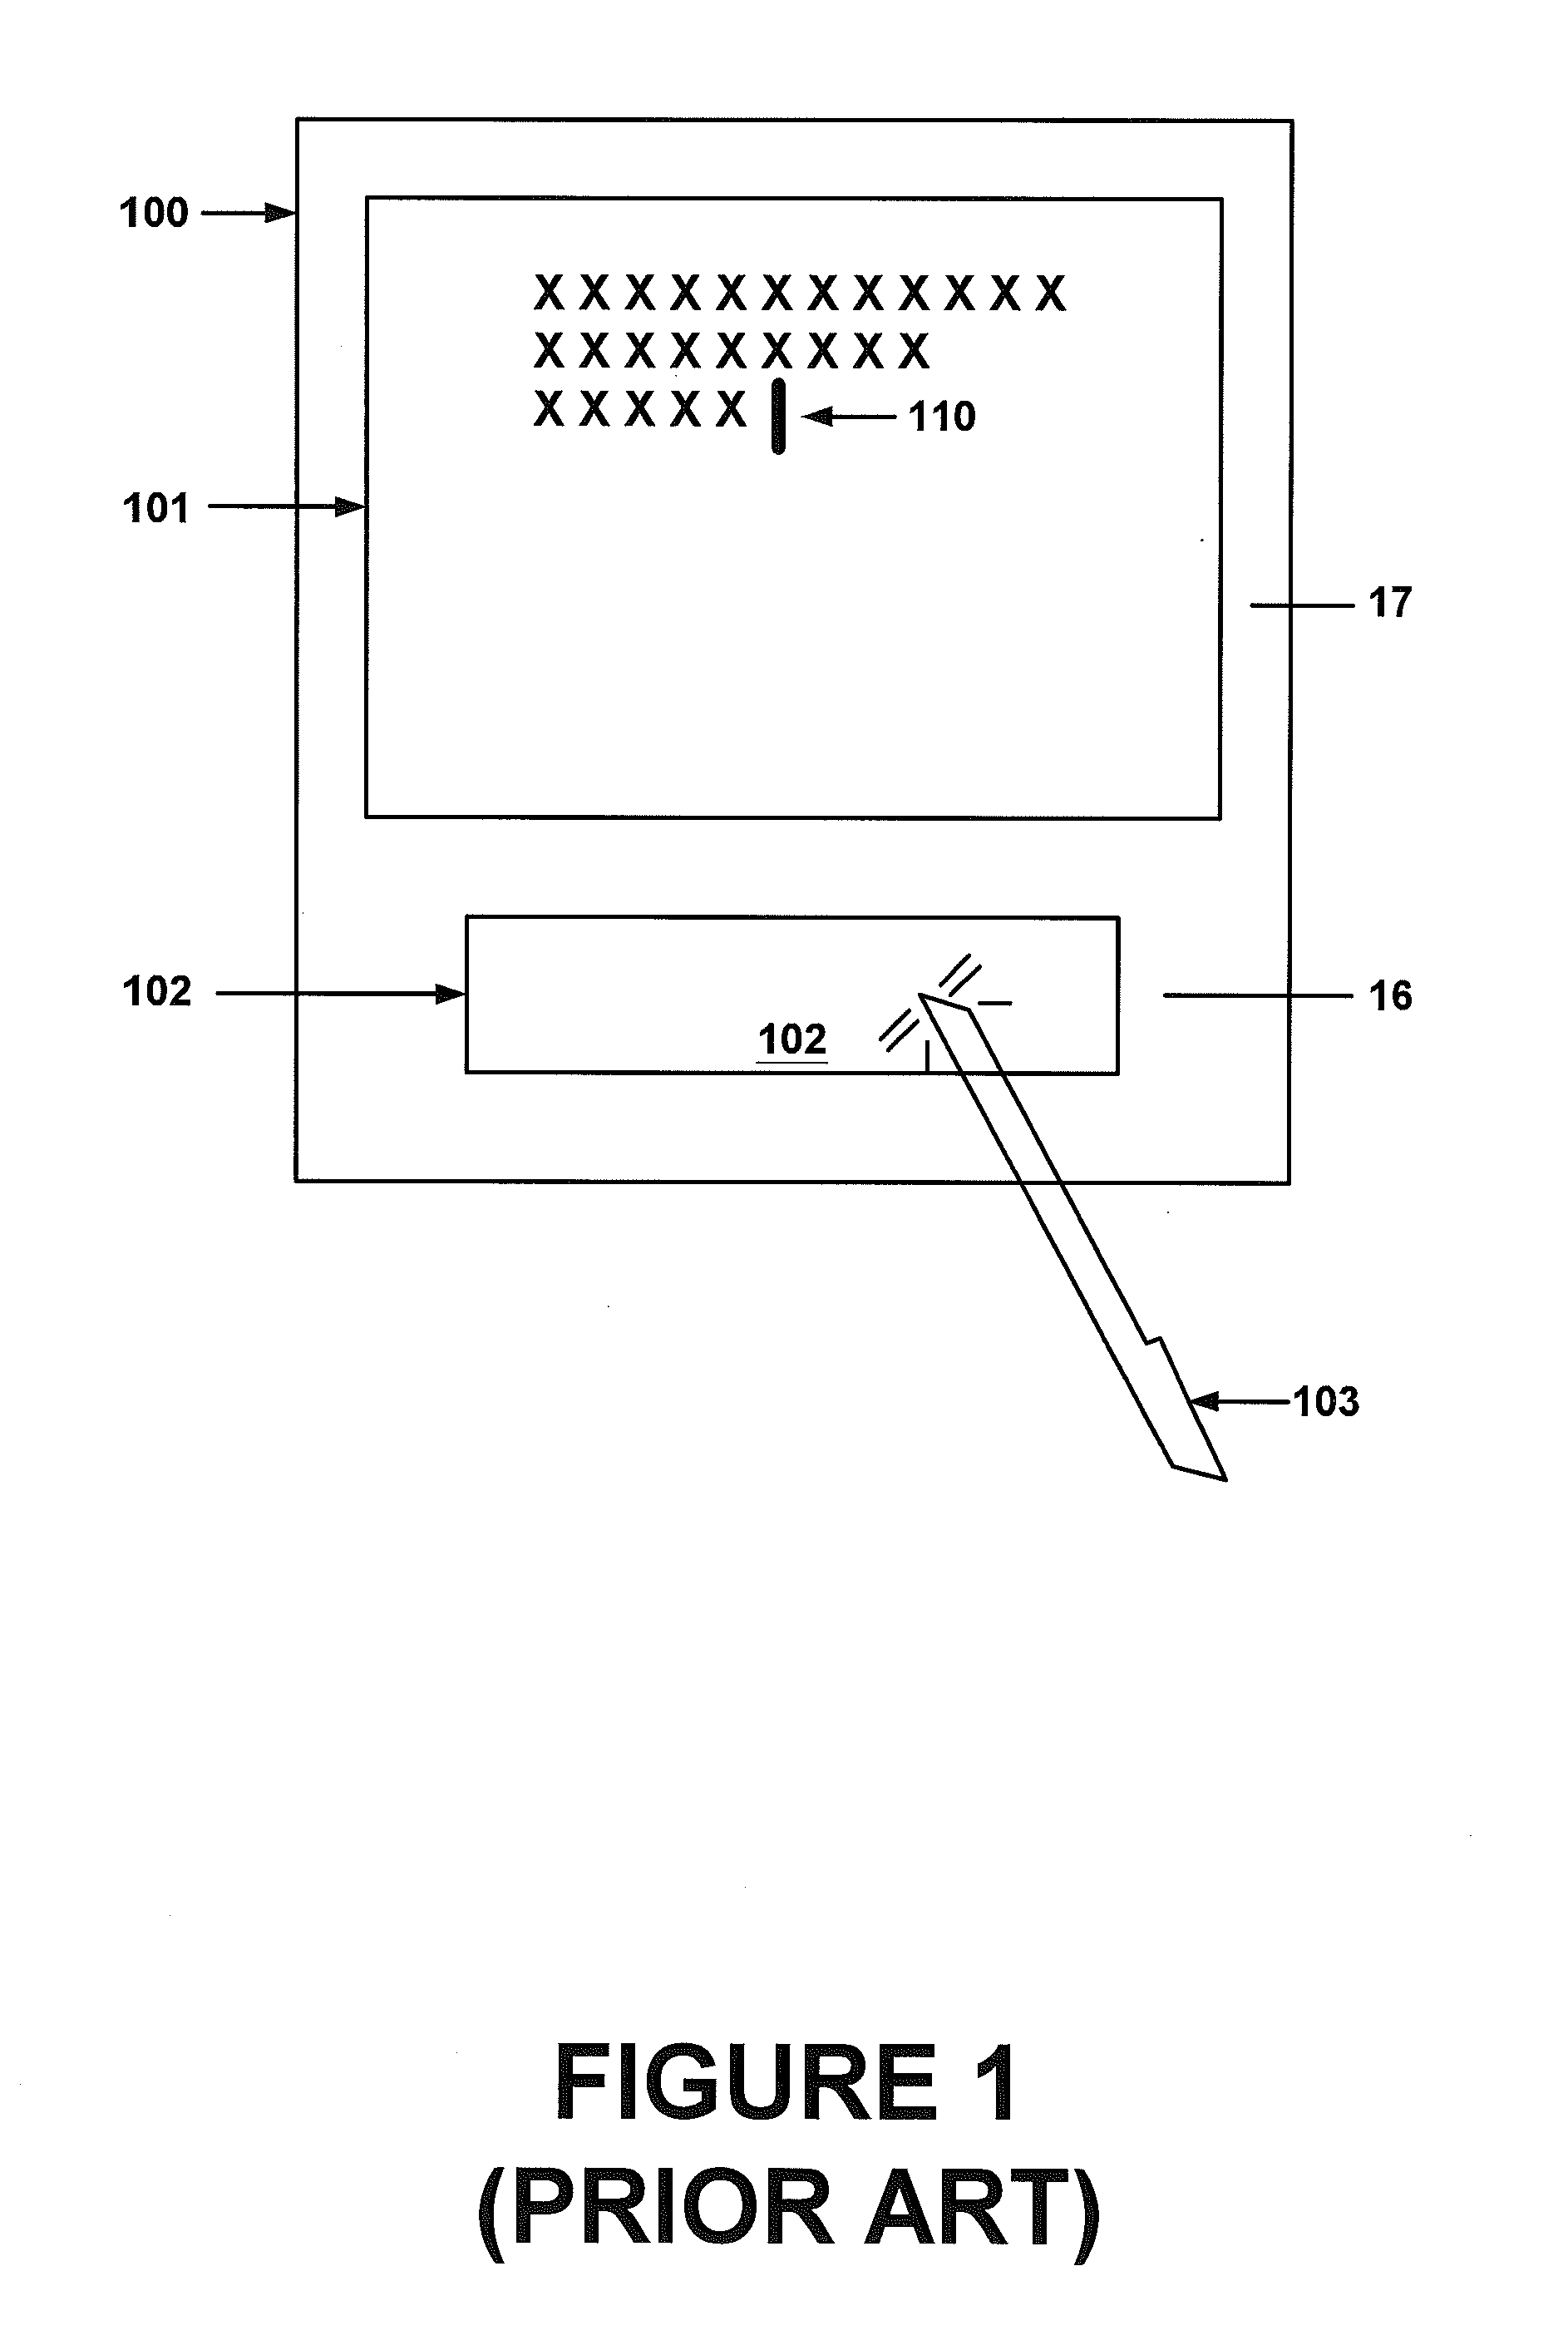 Method and system for handwriting recognition with scrolling input history and in-place editing